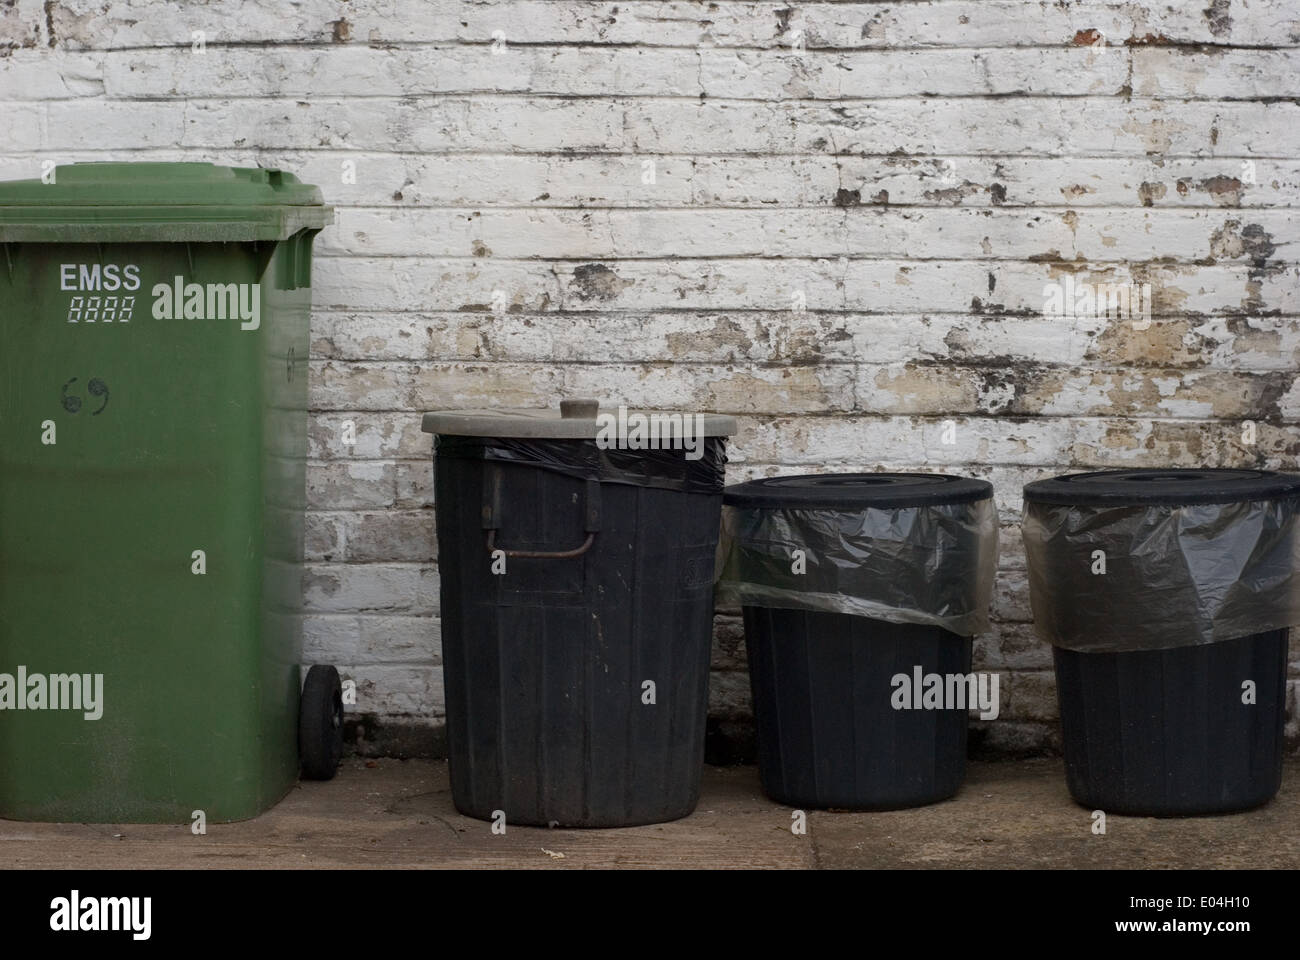 Refuse and recycling bins in South Africa, Stock Photo